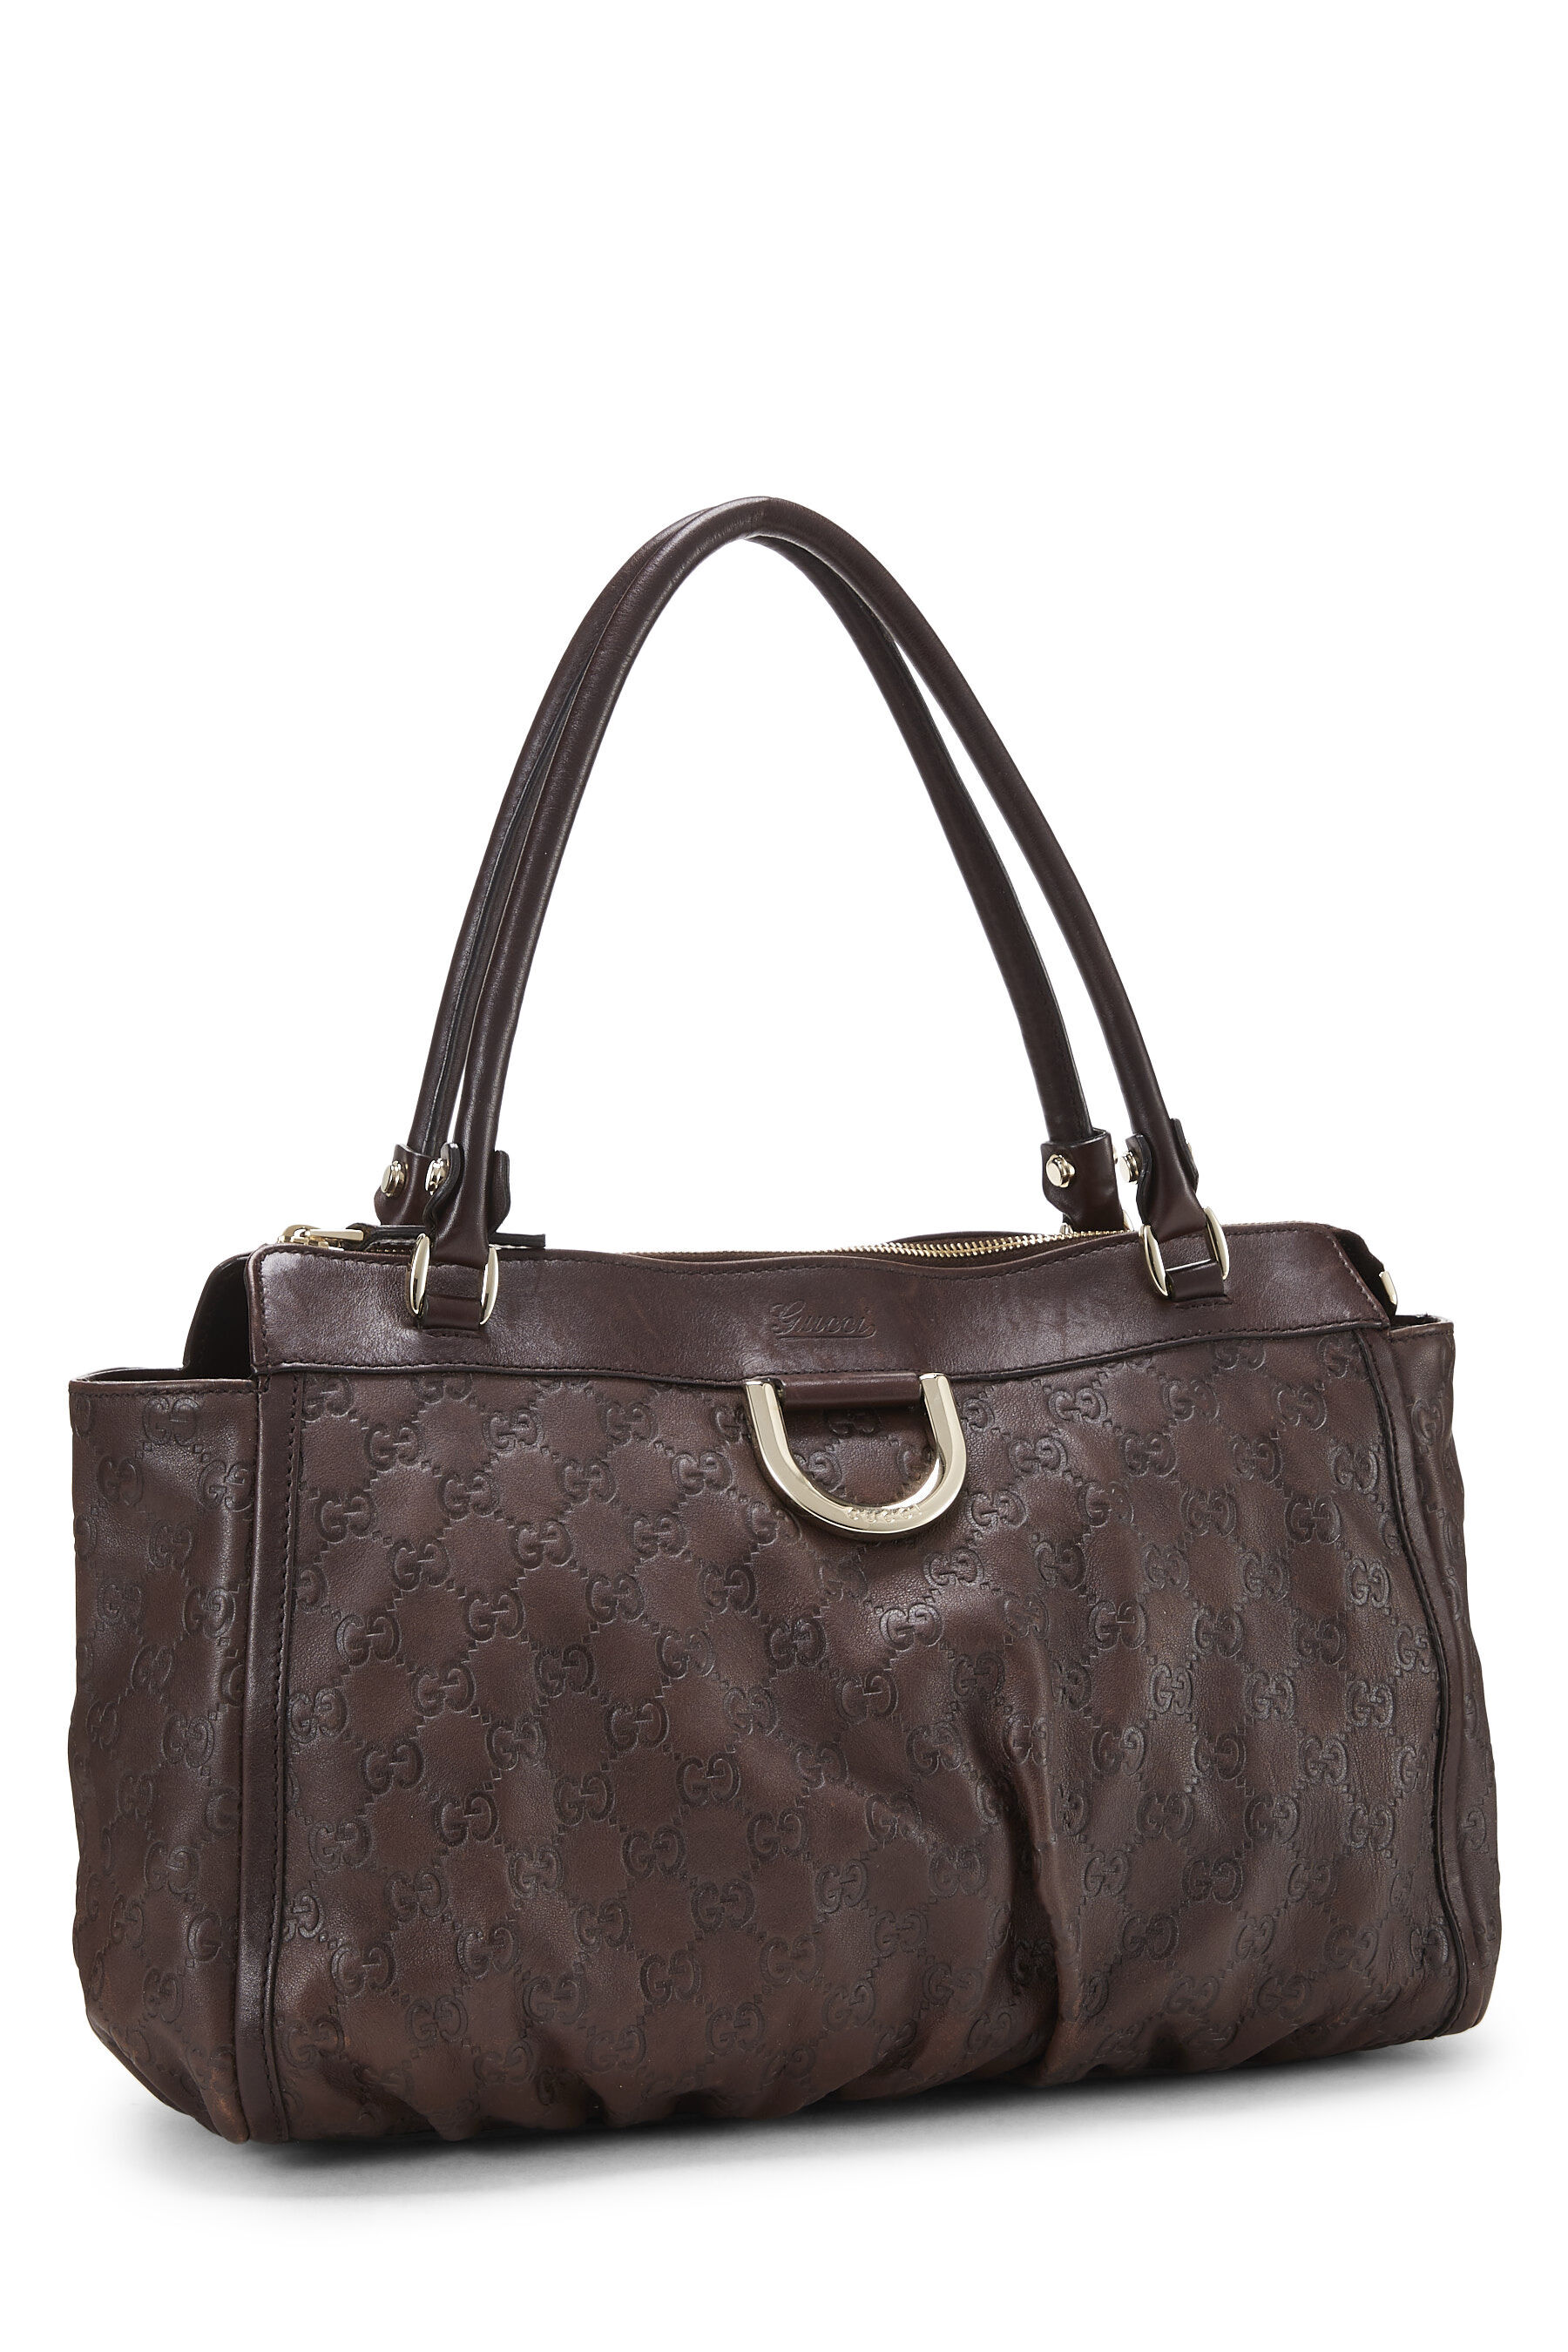 Gucci - Abbey Large D Ring GG Crystal Shopping Tote Brown |  www.luxurybags.eu